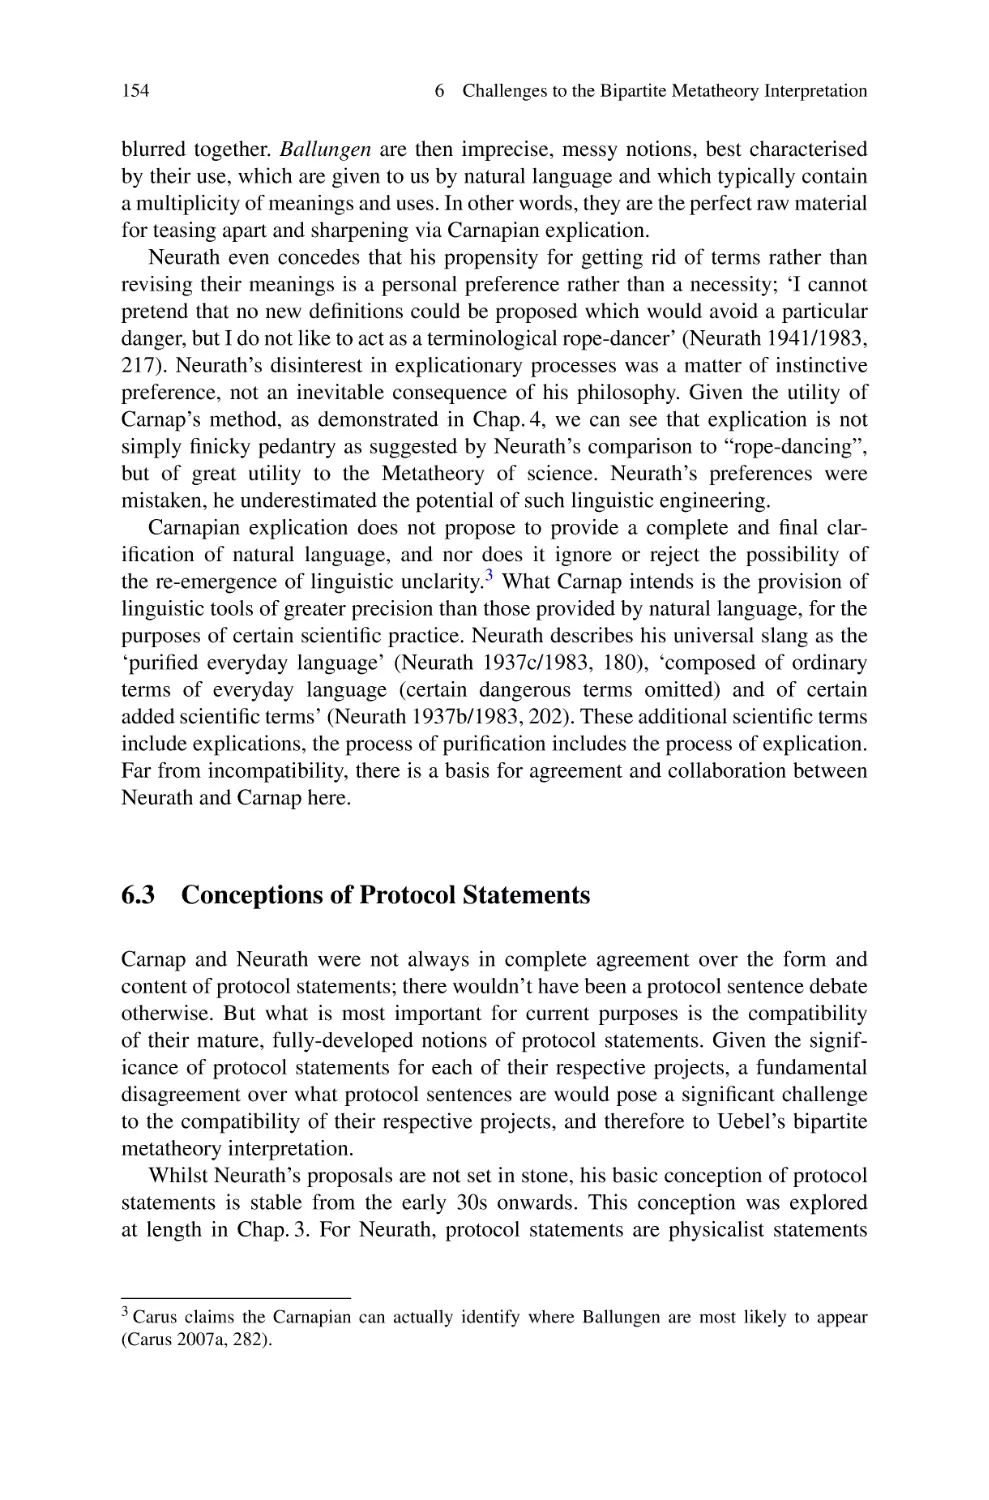 6.3 Conceptions of Protocol Statements